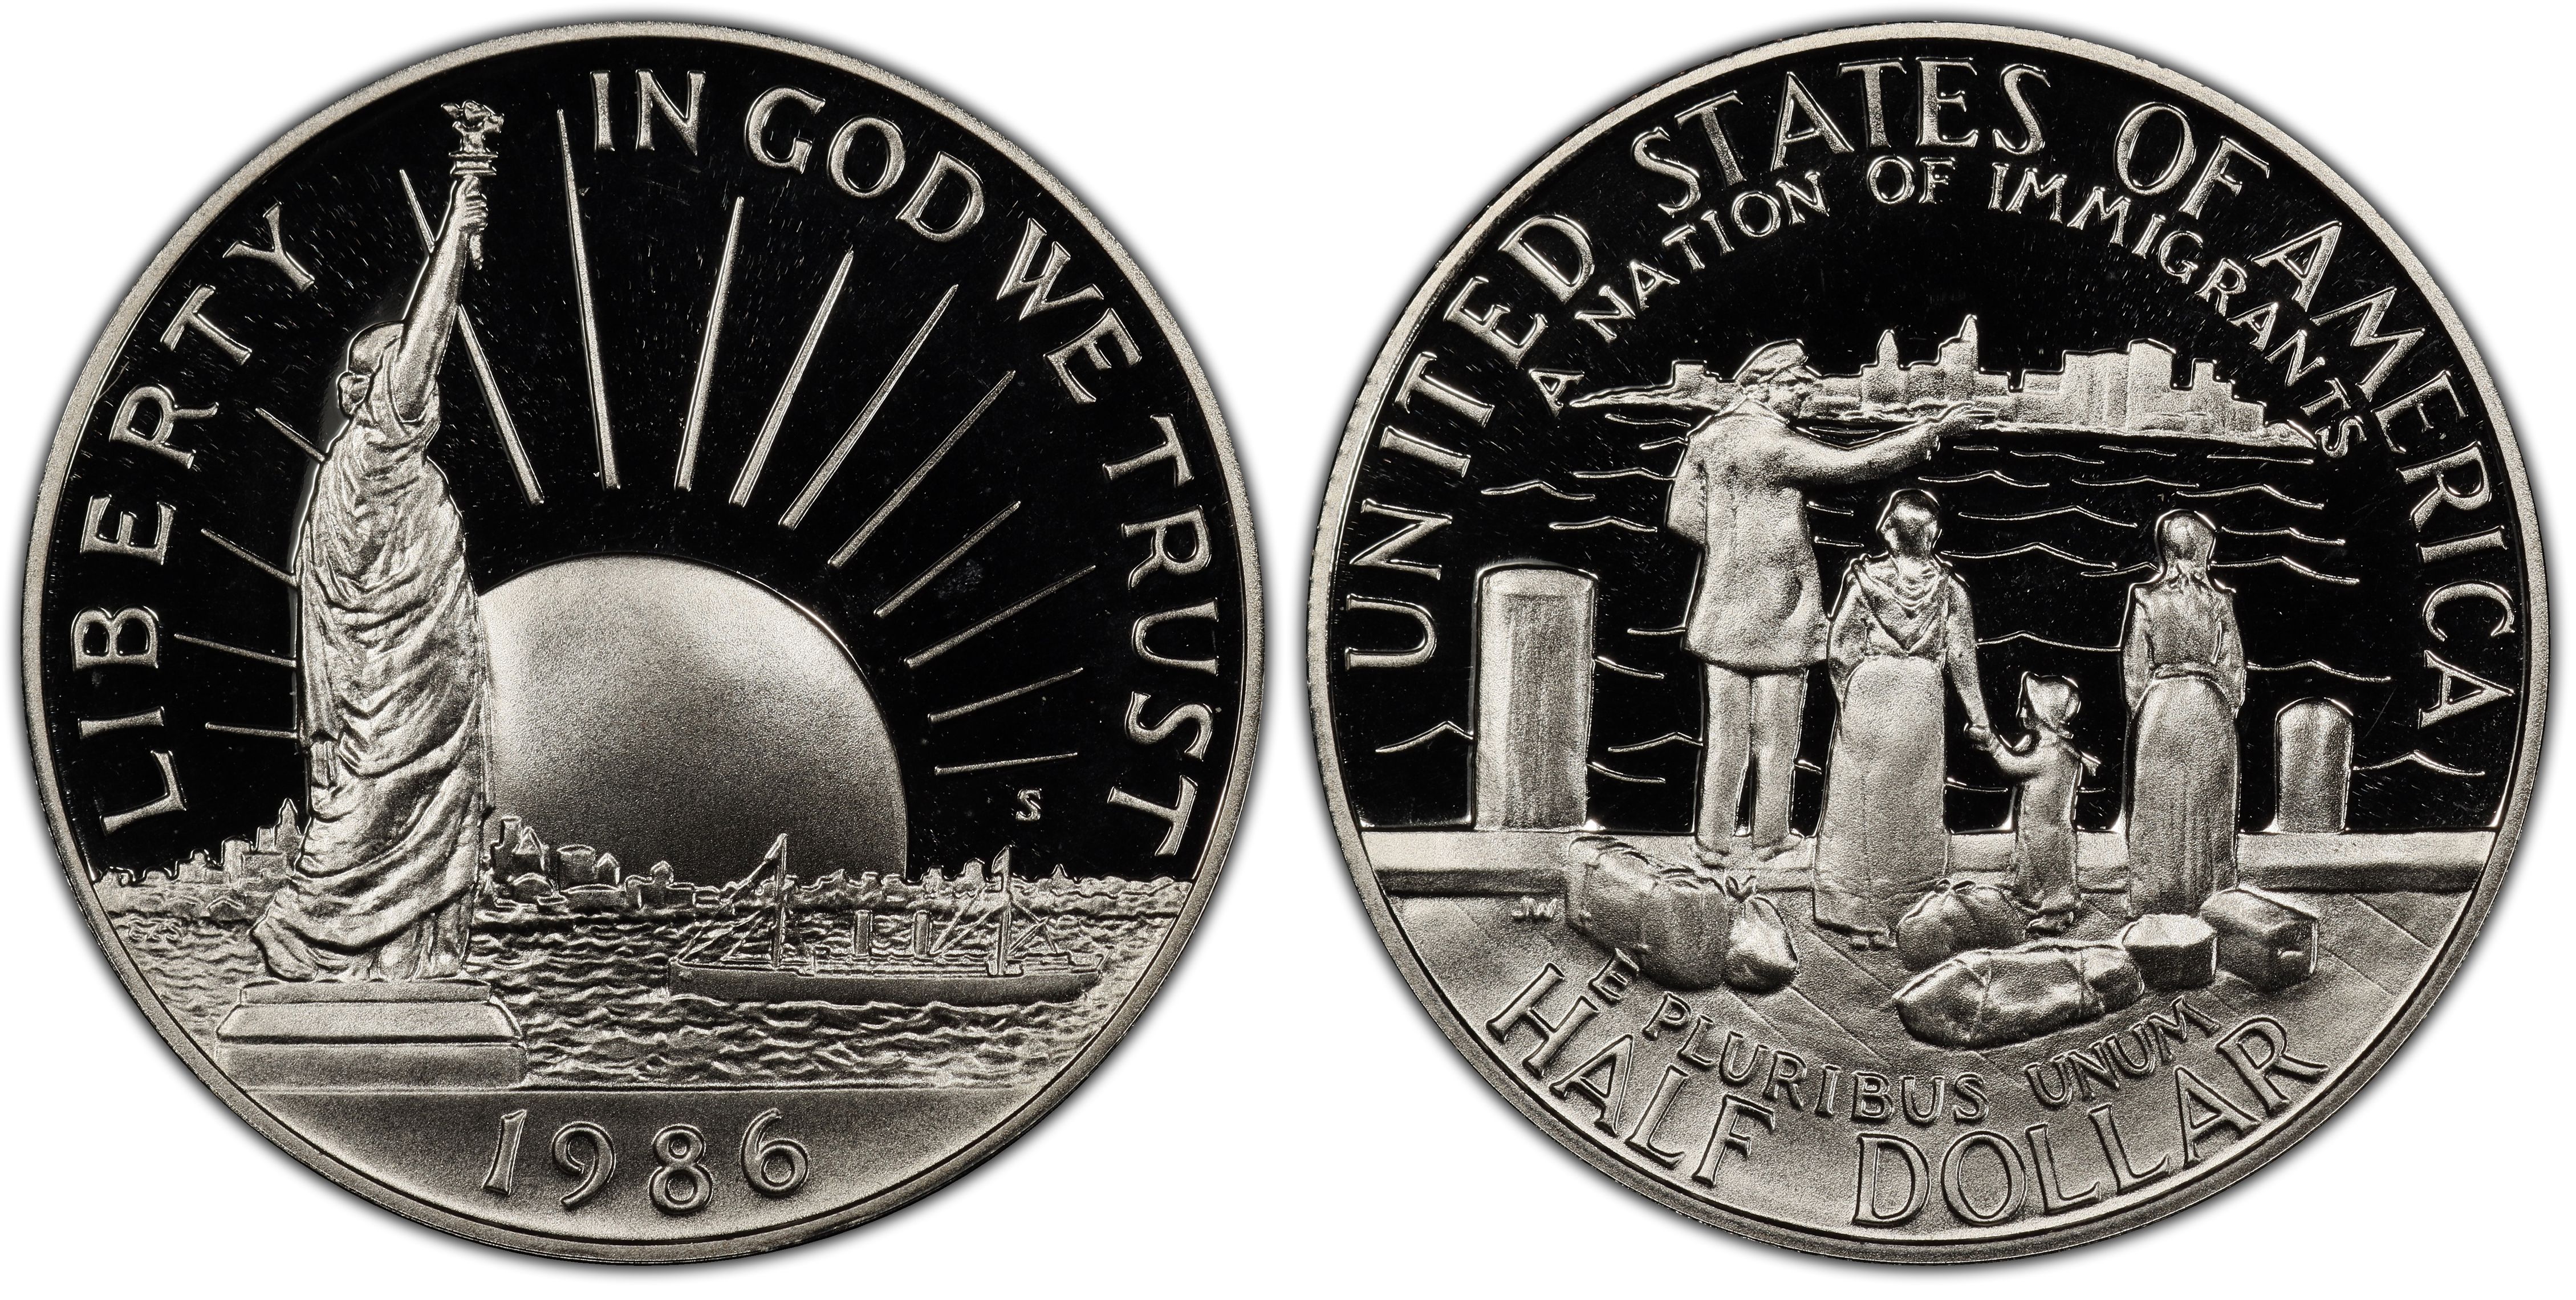 1986 Statue of Liberty Commemorative Half Dollar Proof  Coin in Capsules 